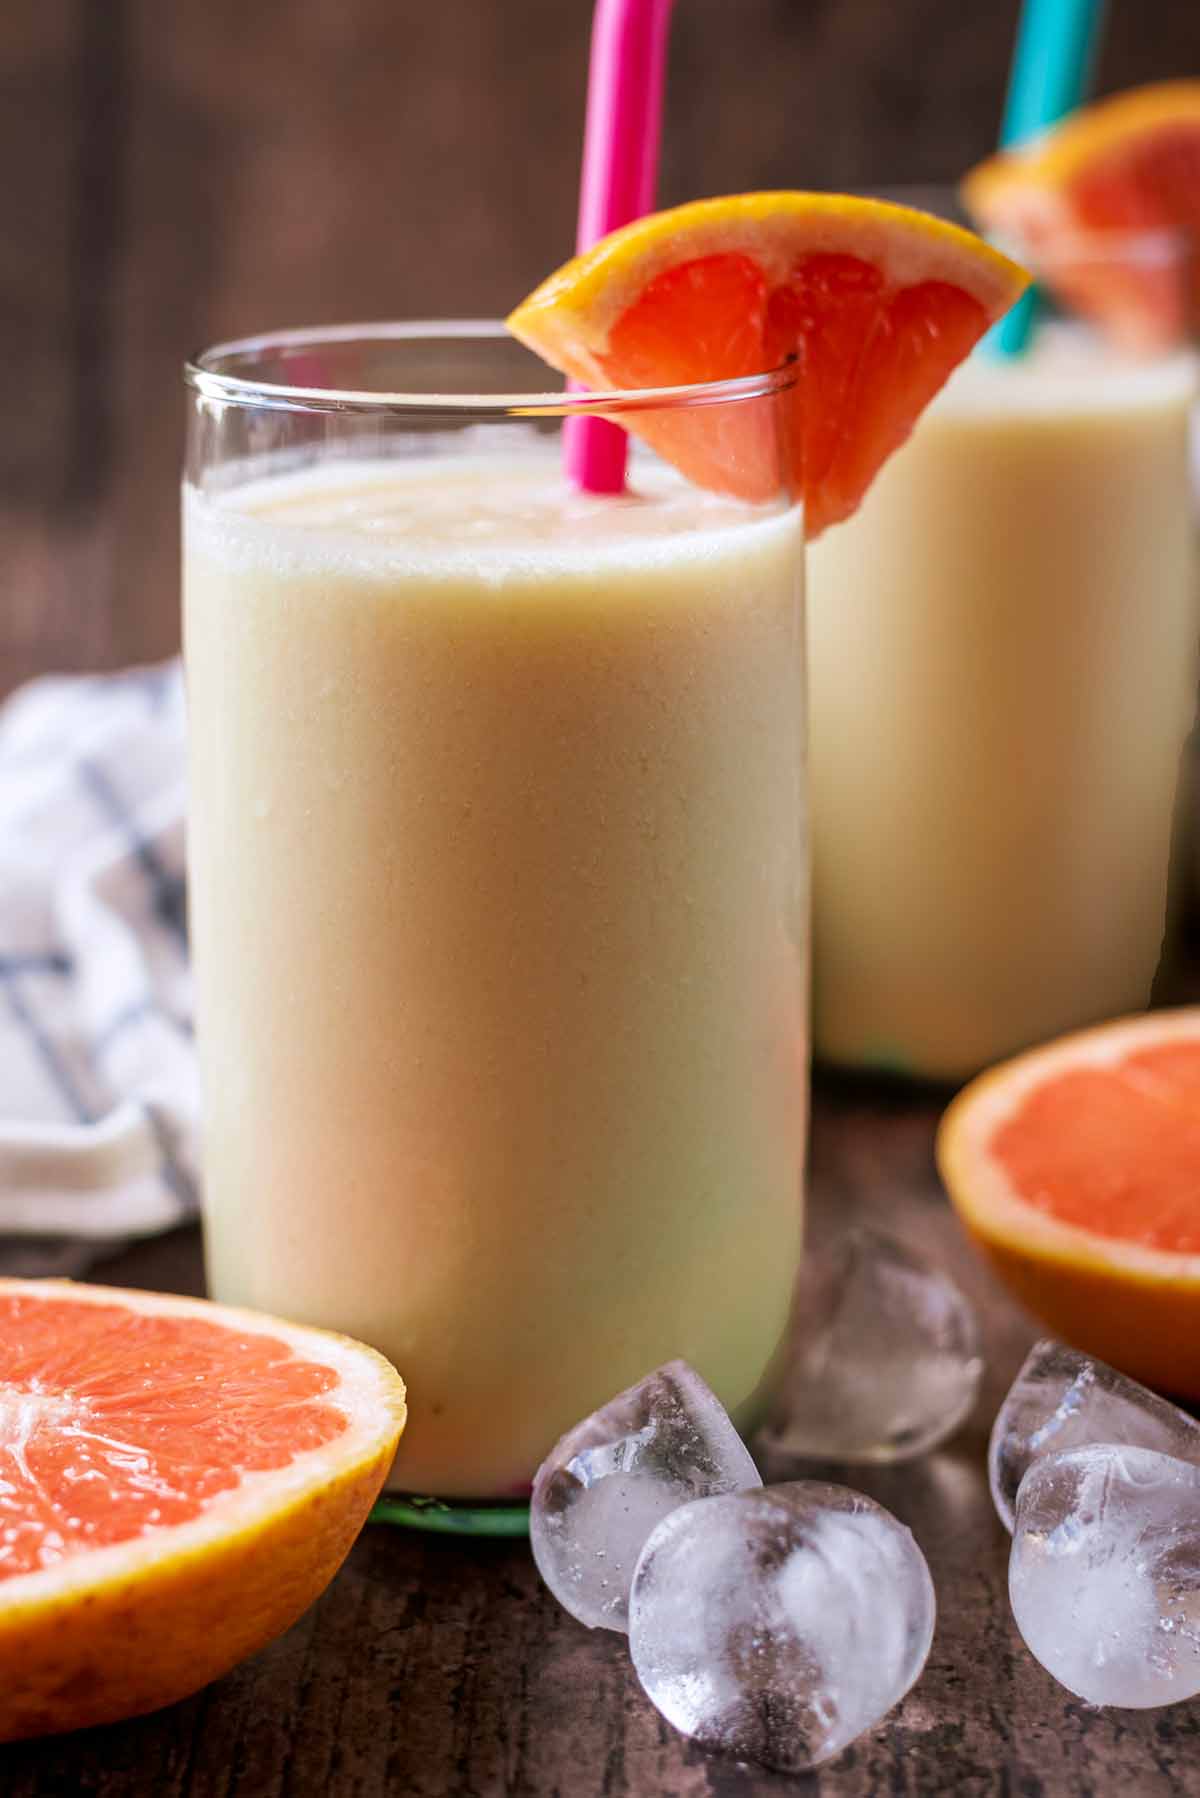 A smoothie in a tall glass with a wedge of grapefruit on the rim.